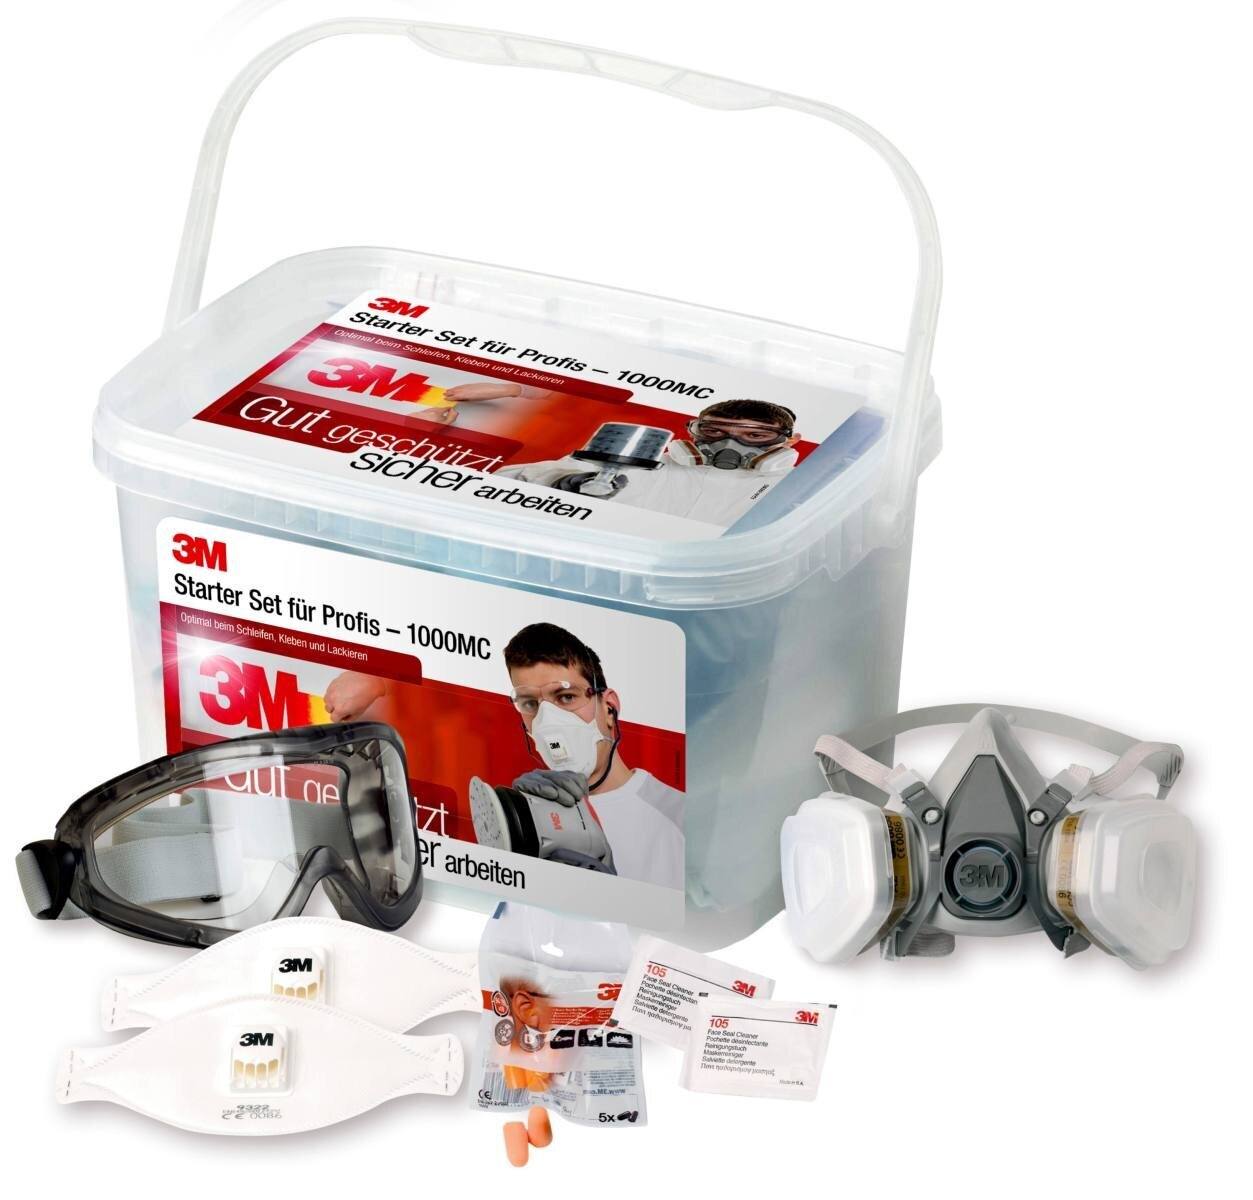 3M Safety Box 1000MCWE Contents: 1 x 6200M half mask, 2 x 6055 A2 gas filters, 2 x 5935 P3R particle filters, 2 x 501, 2 x 9322+ particle masks, 8 x 1100 earplugs, 1 x 2890SA full-view goggles